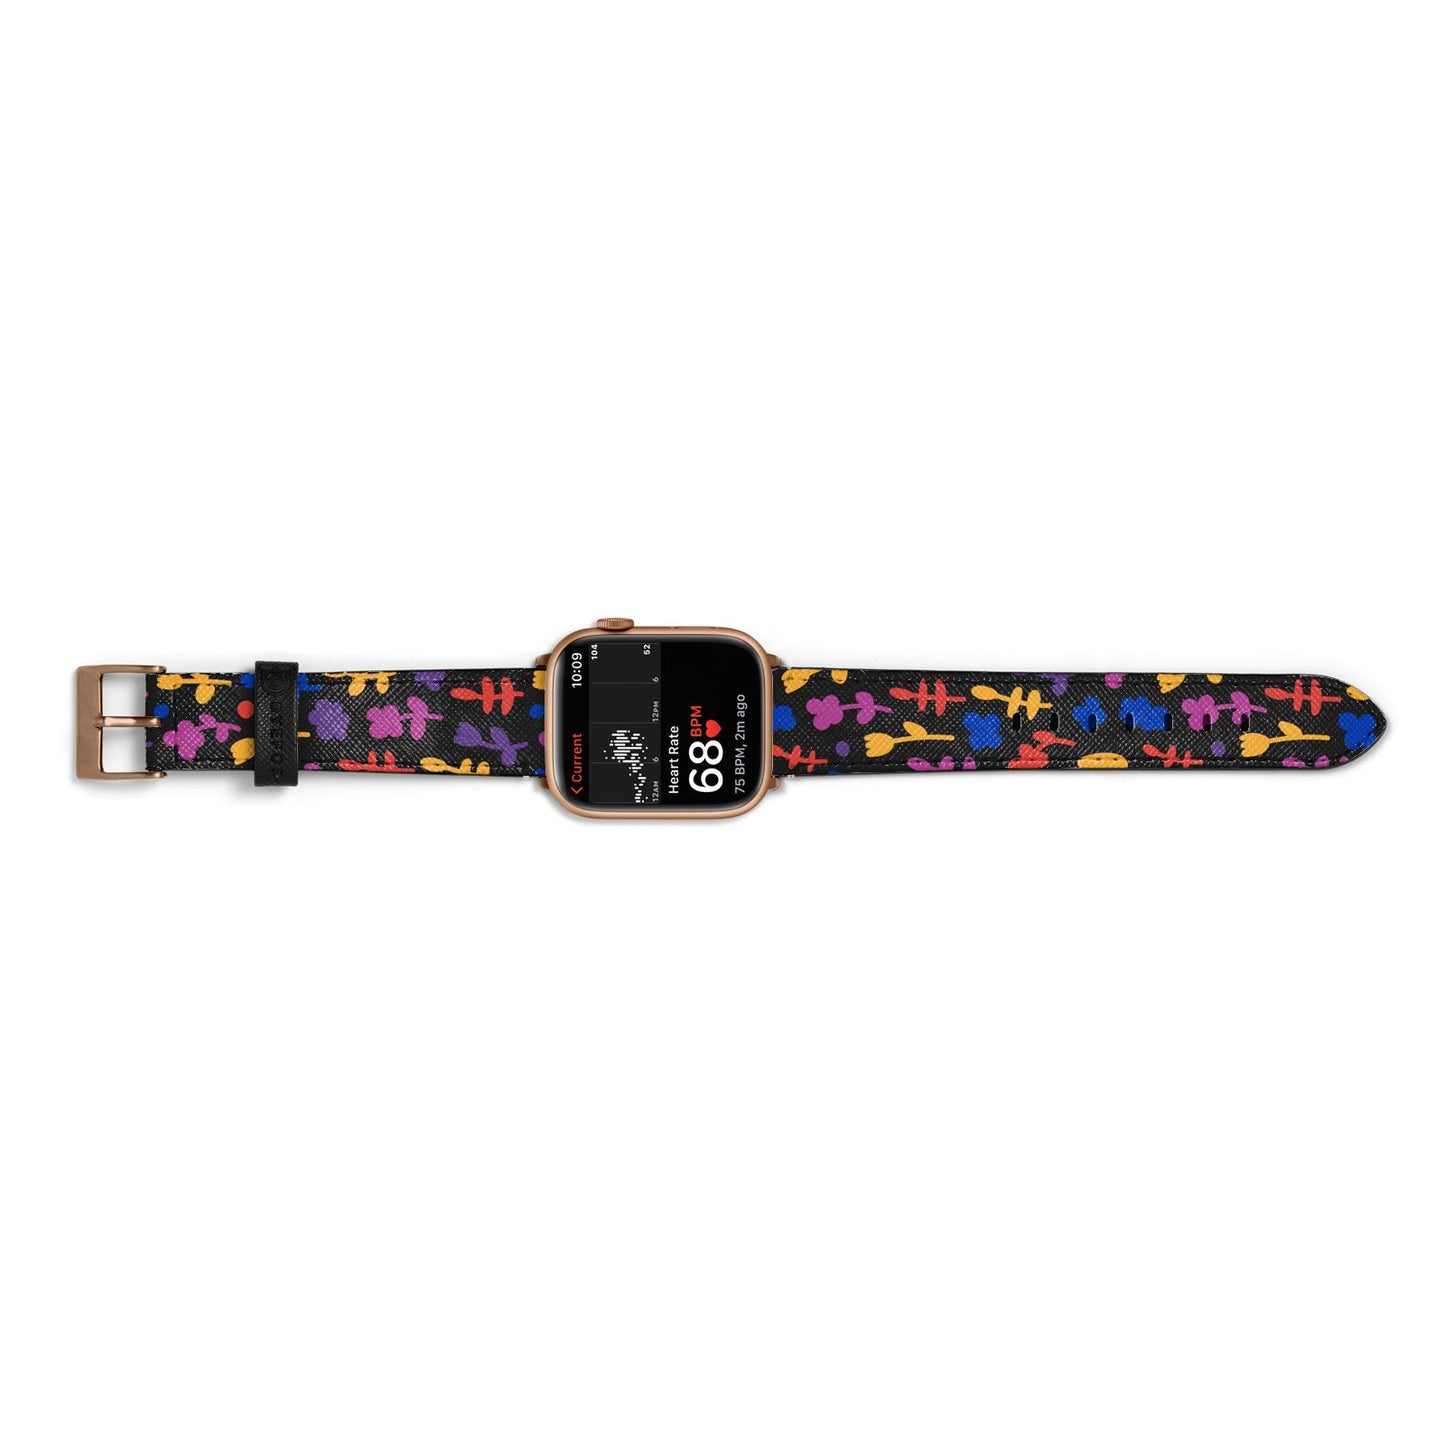 Abstract Floral Apple Watch Strap Size 38mm Landscape Image Gold Hardware